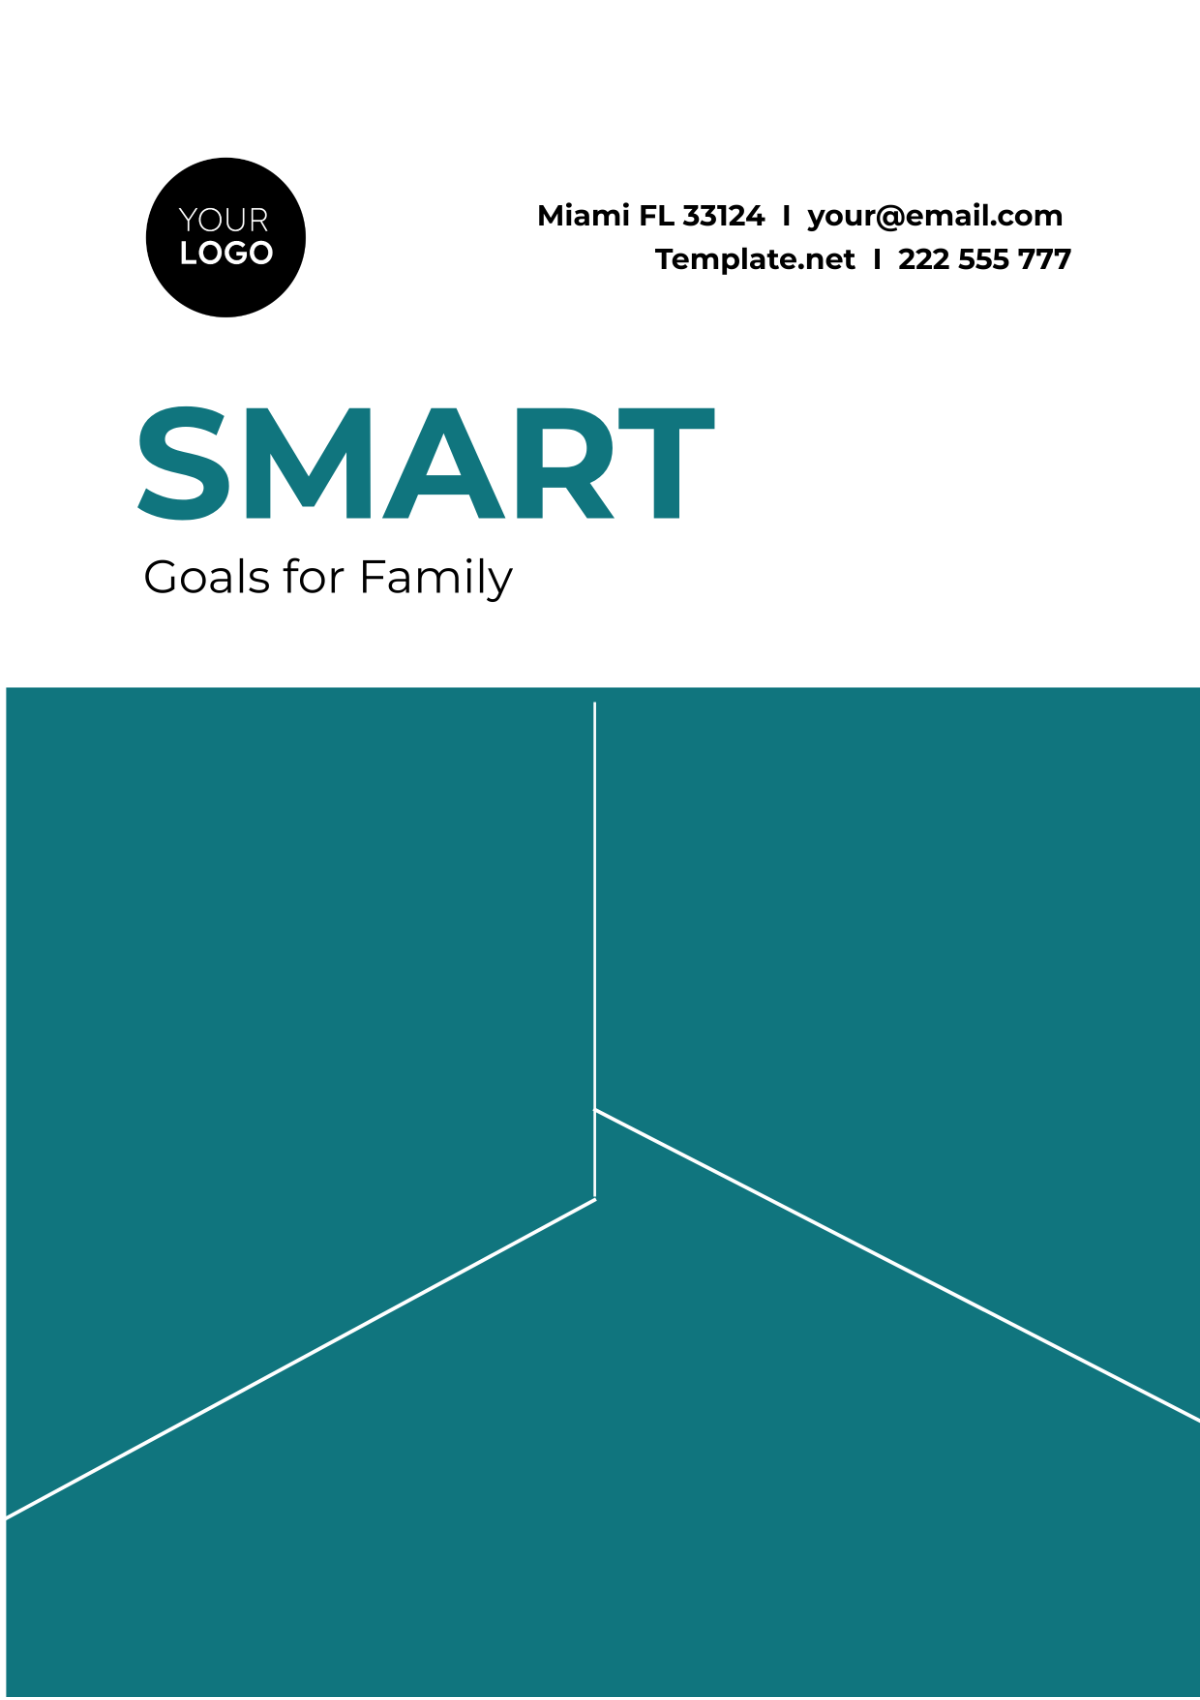 SMART Goals Template for Family